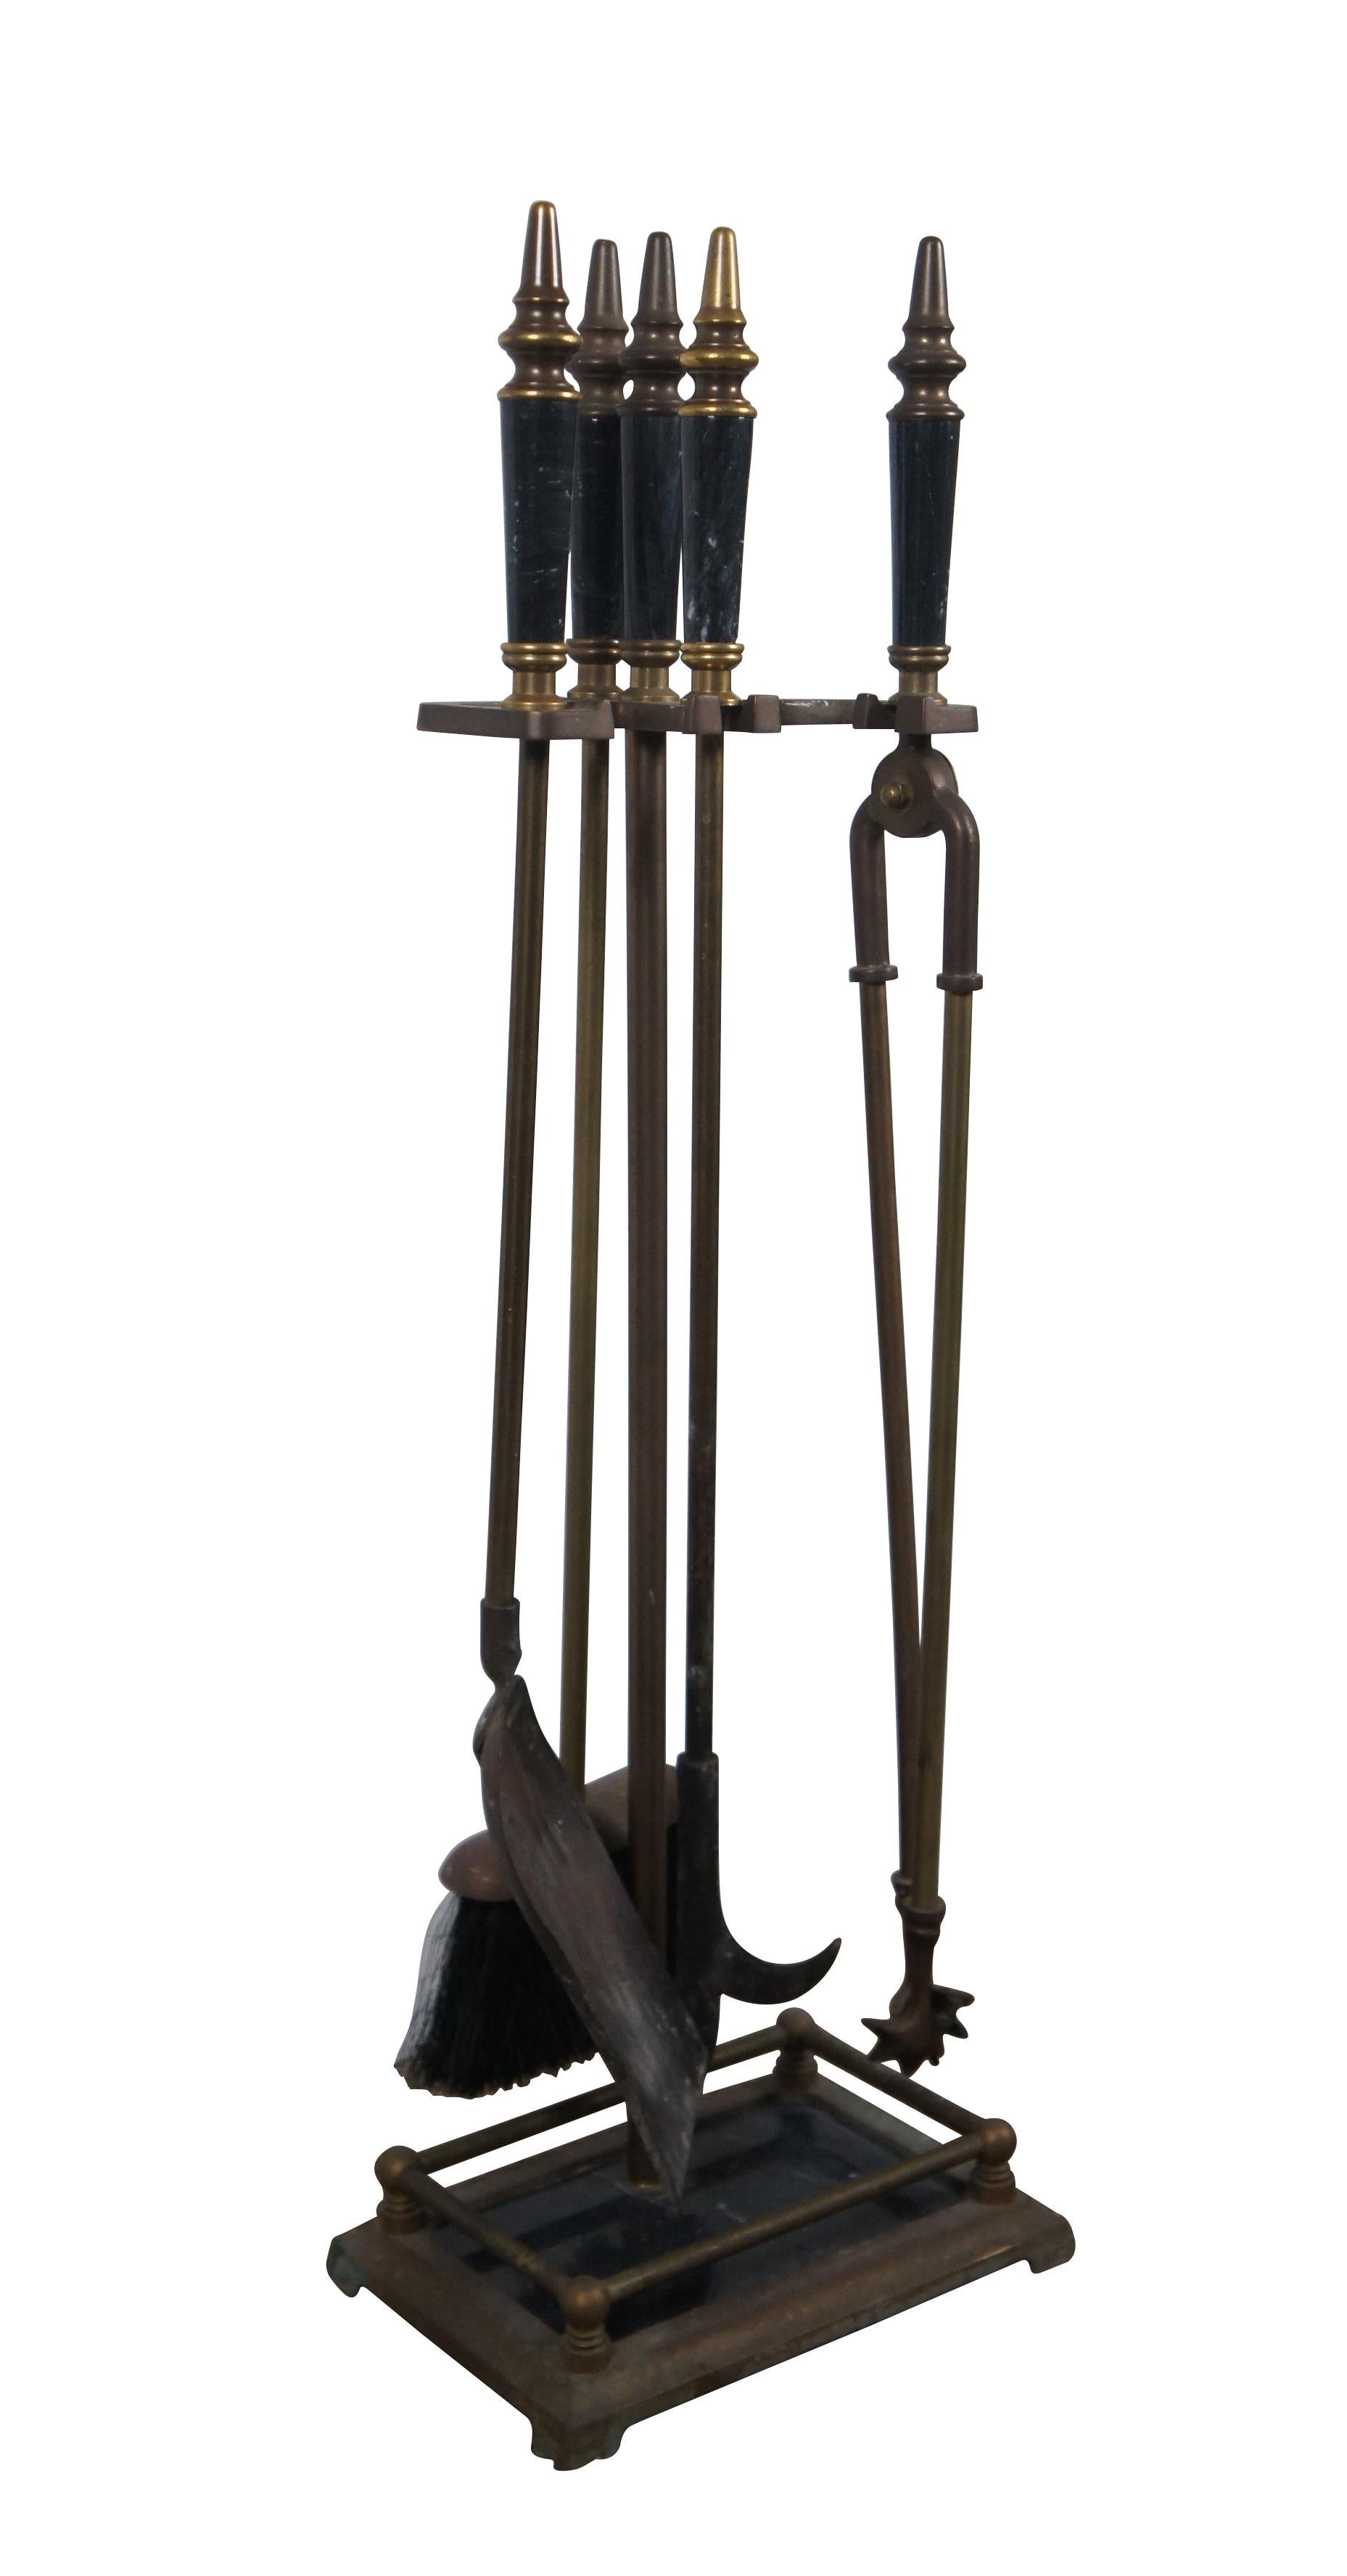 Mid to late 20th century five piece set of fireplace / hearth tools and stand by Decorative Crafts Inc, item number 2924. Made of brass with black marble base and tool grips with turned conical finials. Set includes stand, shovel, poker, tongs, and